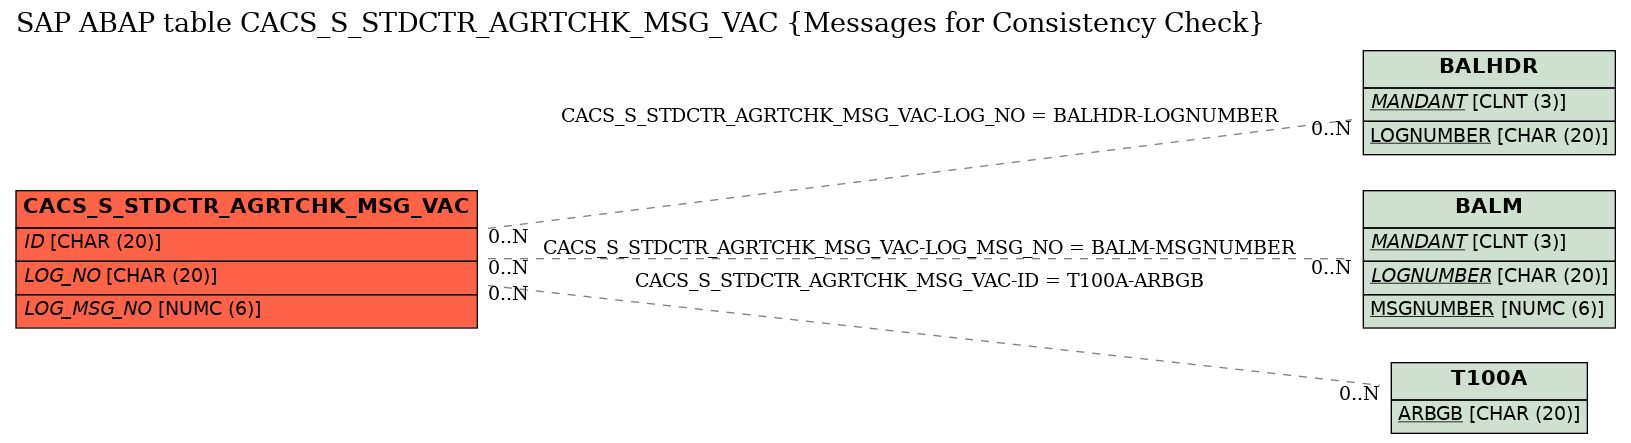 E-R Diagram for table CACS_S_STDCTR_AGRTCHK_MSG_VAC (Messages for Consistency Check)